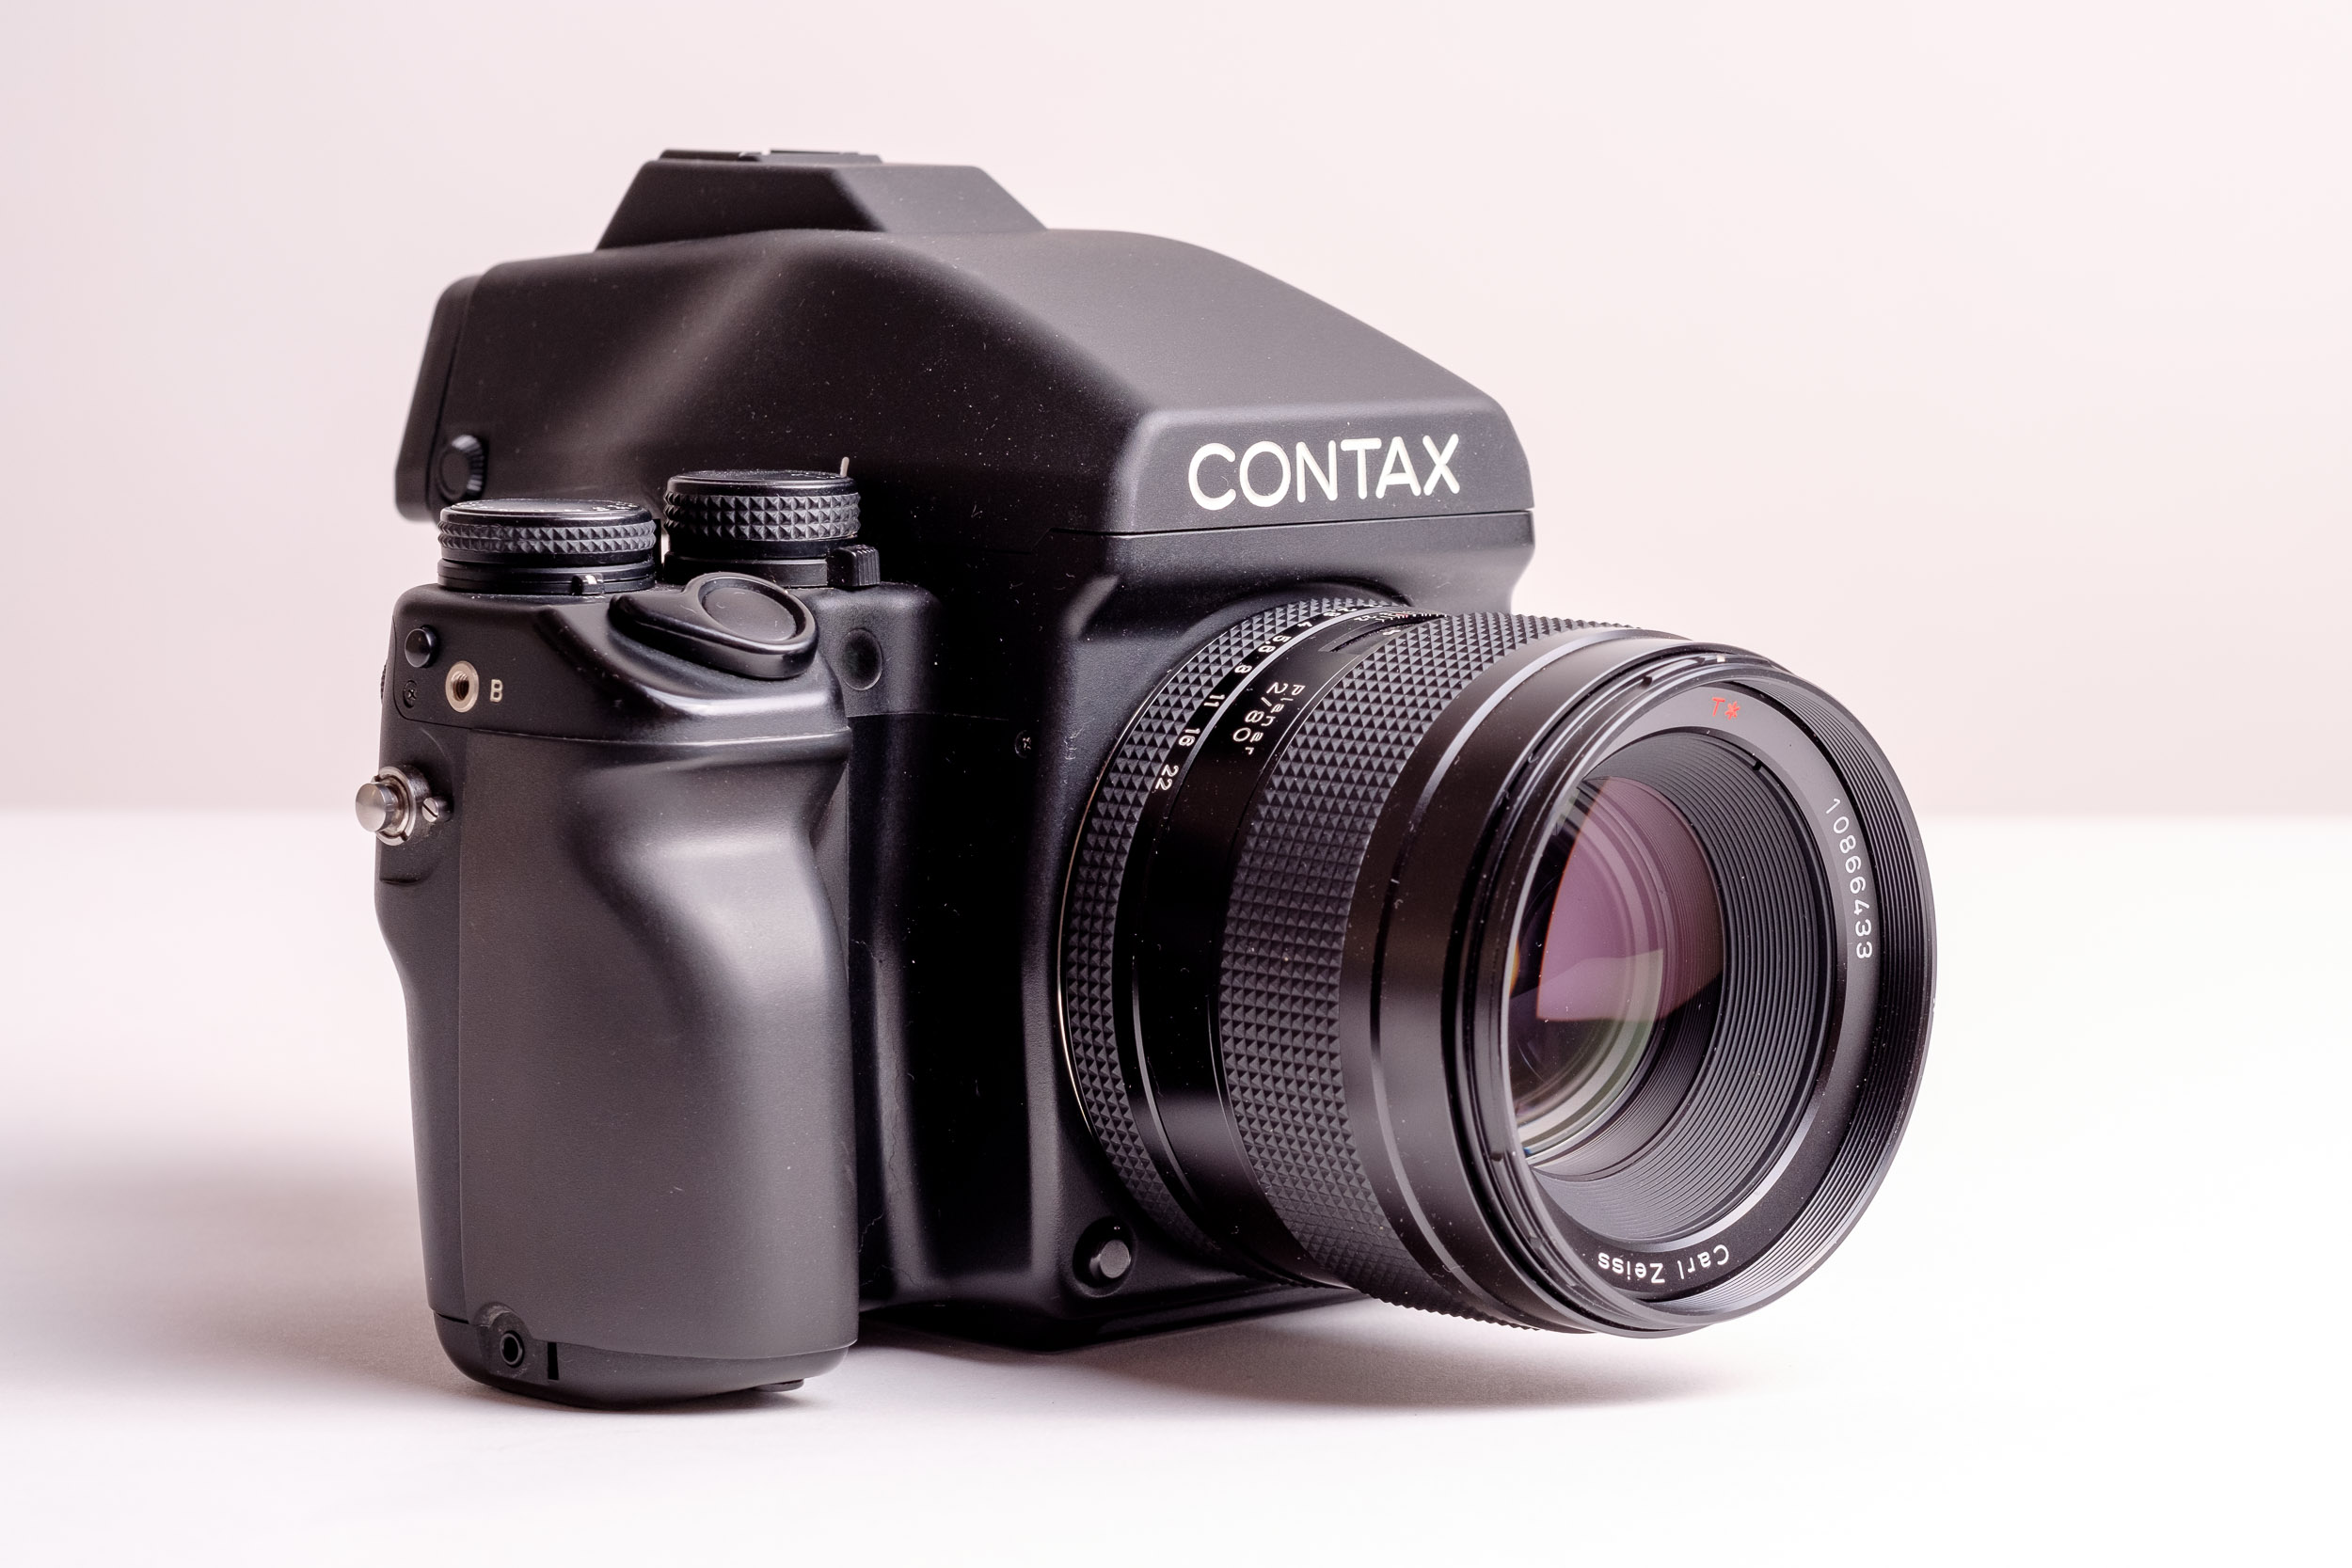 I'm selling my Contax 645 camera. 